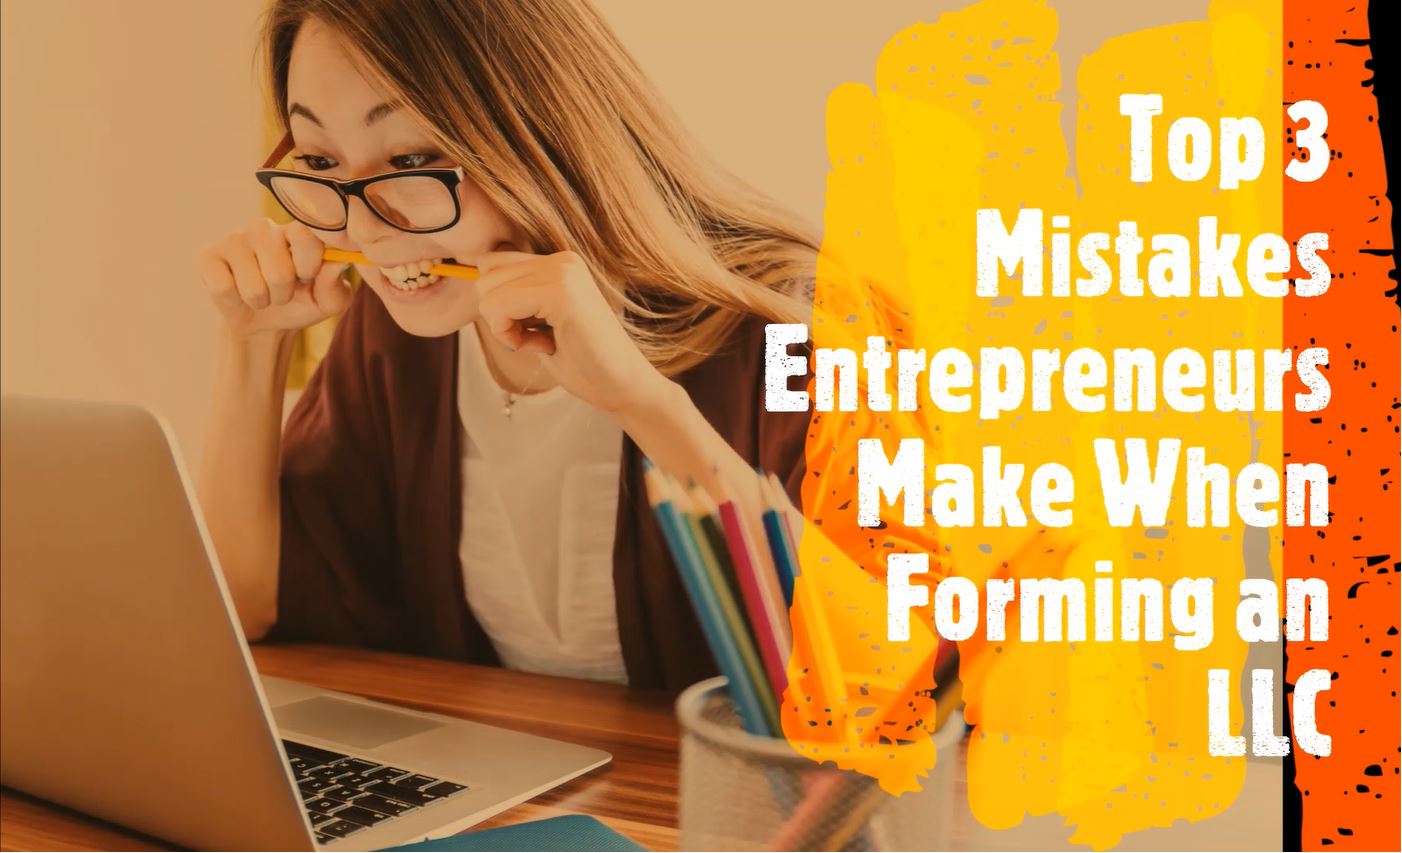 Top 3 Mistakes Entrepreneurs Make When Forming an LLC or Corporation on Their Own